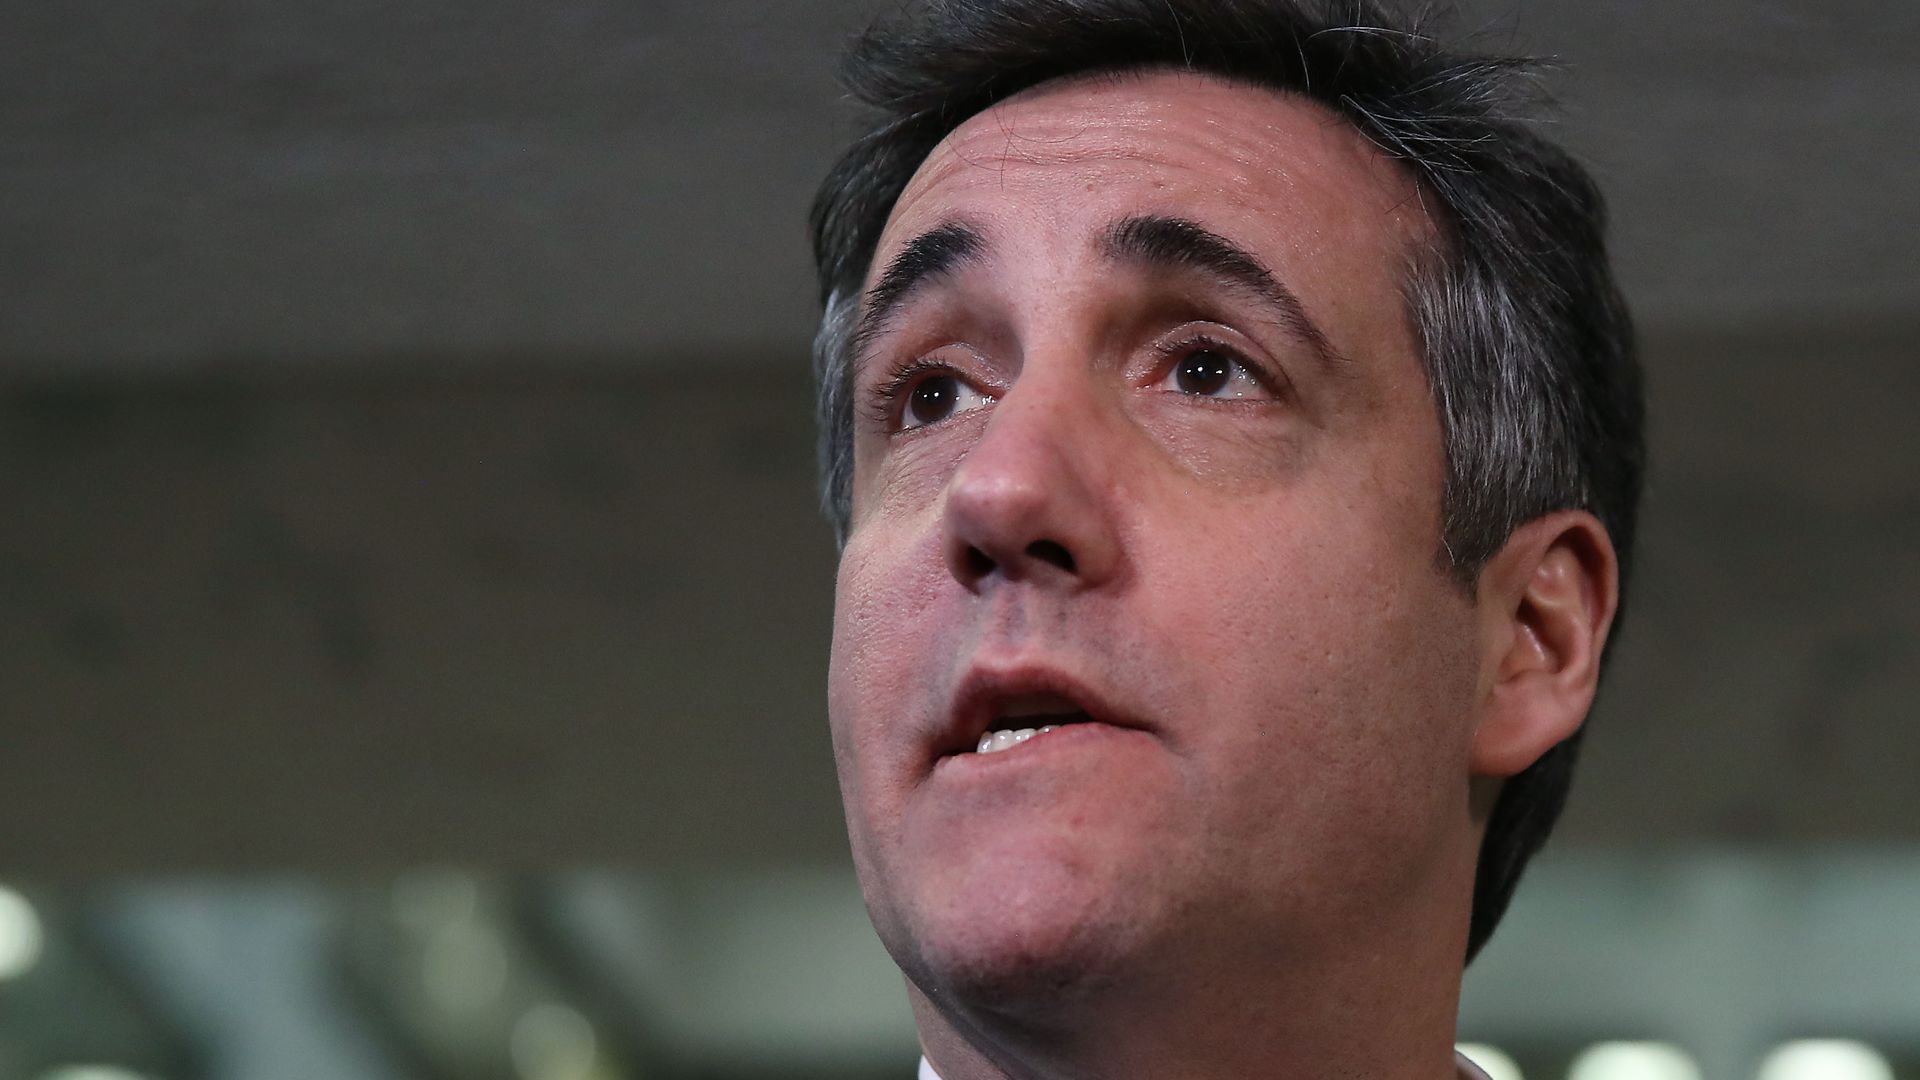 Michael Cohen is providing documents on President Trump to the House Oversight Committee on Wednesday.